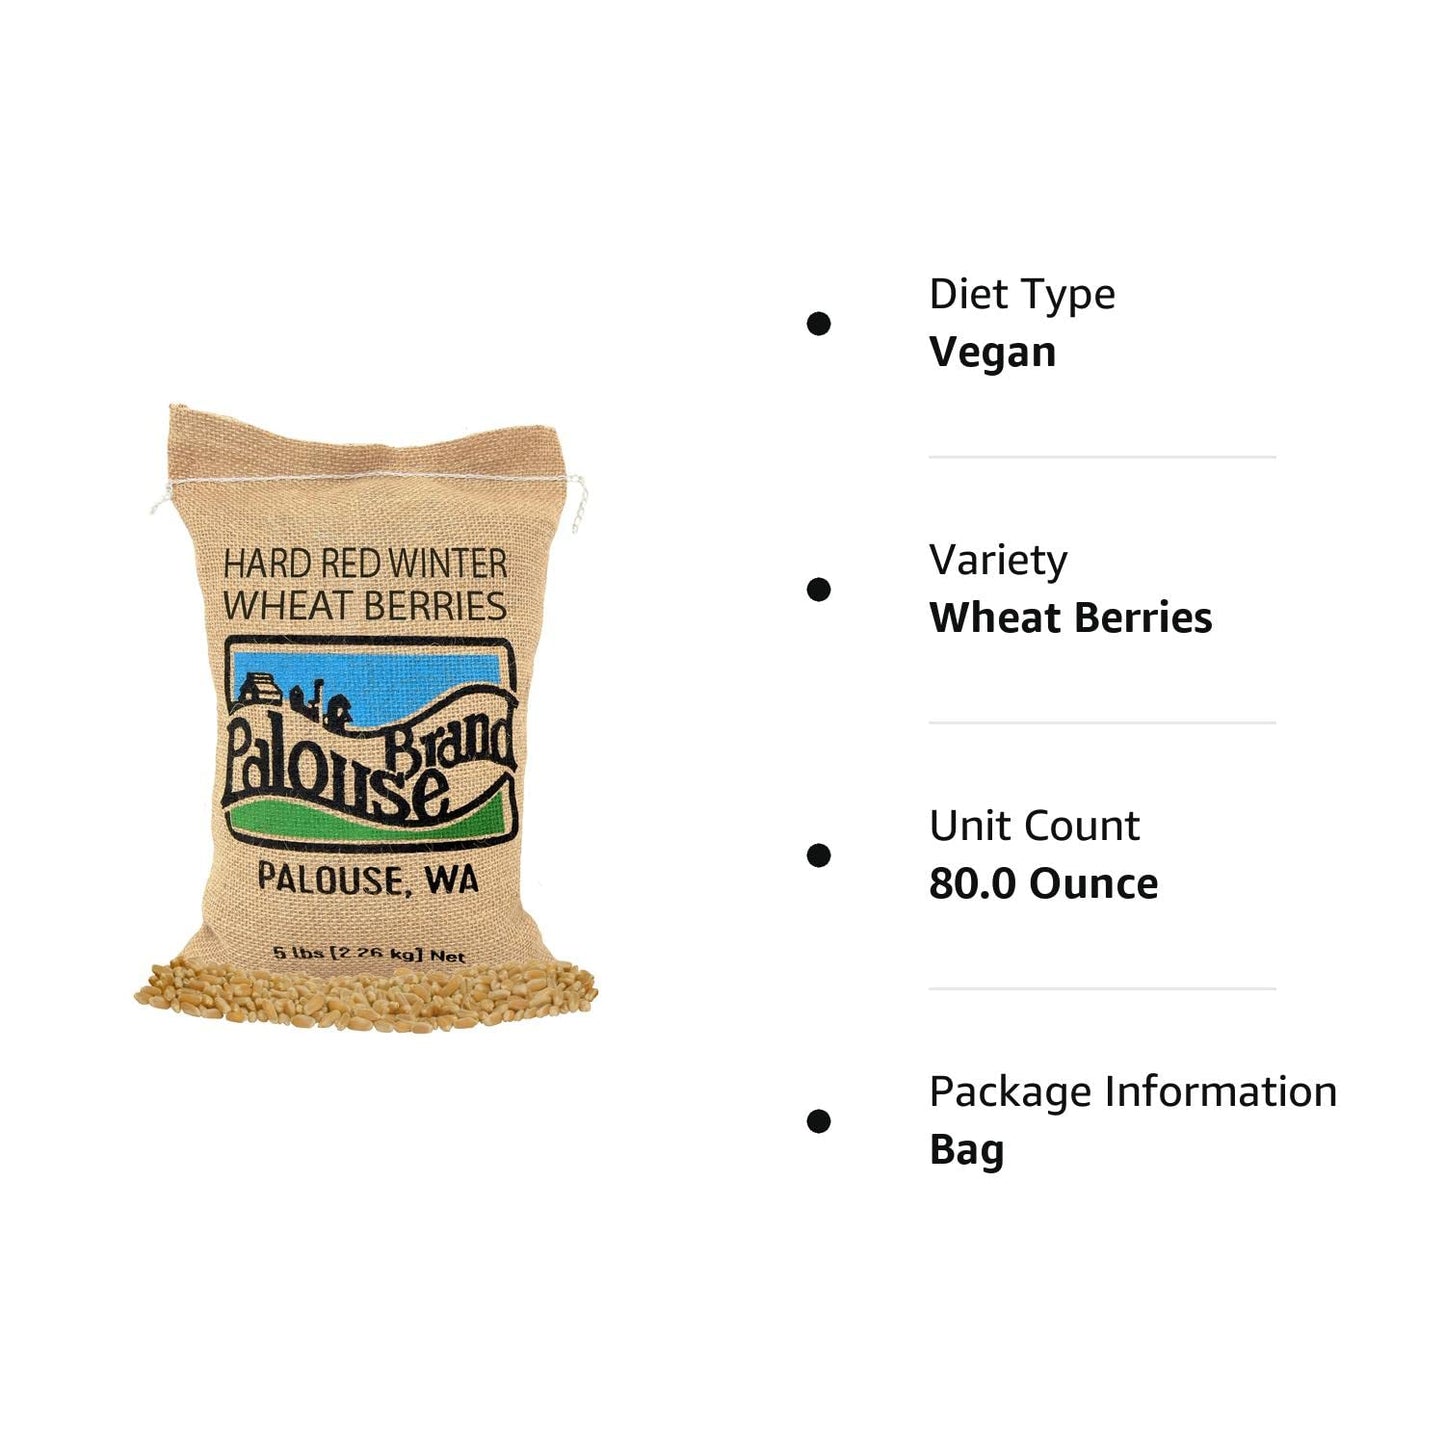 Hard Red Winter Wheat Berries | Family Farmed in Washington State | Non-GMO Project Verified | 5 LBS | 100% Non-Irradiated | Certified Kosher Parve | Field Traced | Burlap Bag